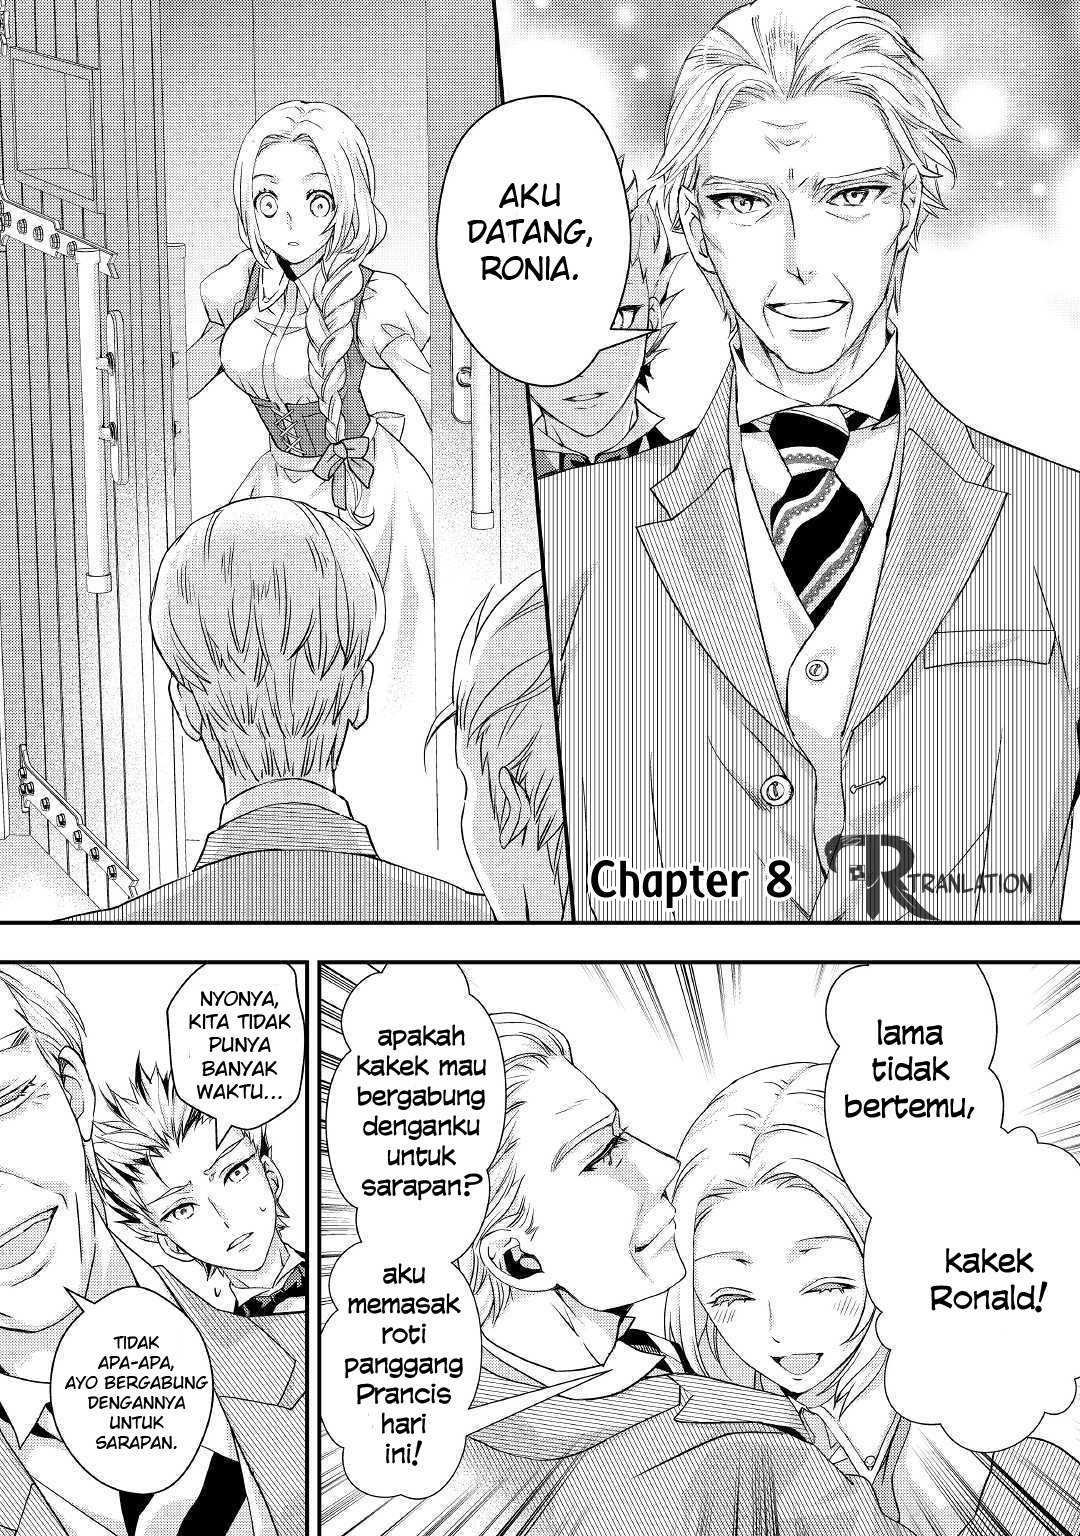 Milady Just Wants to Relax Chapter 08.1